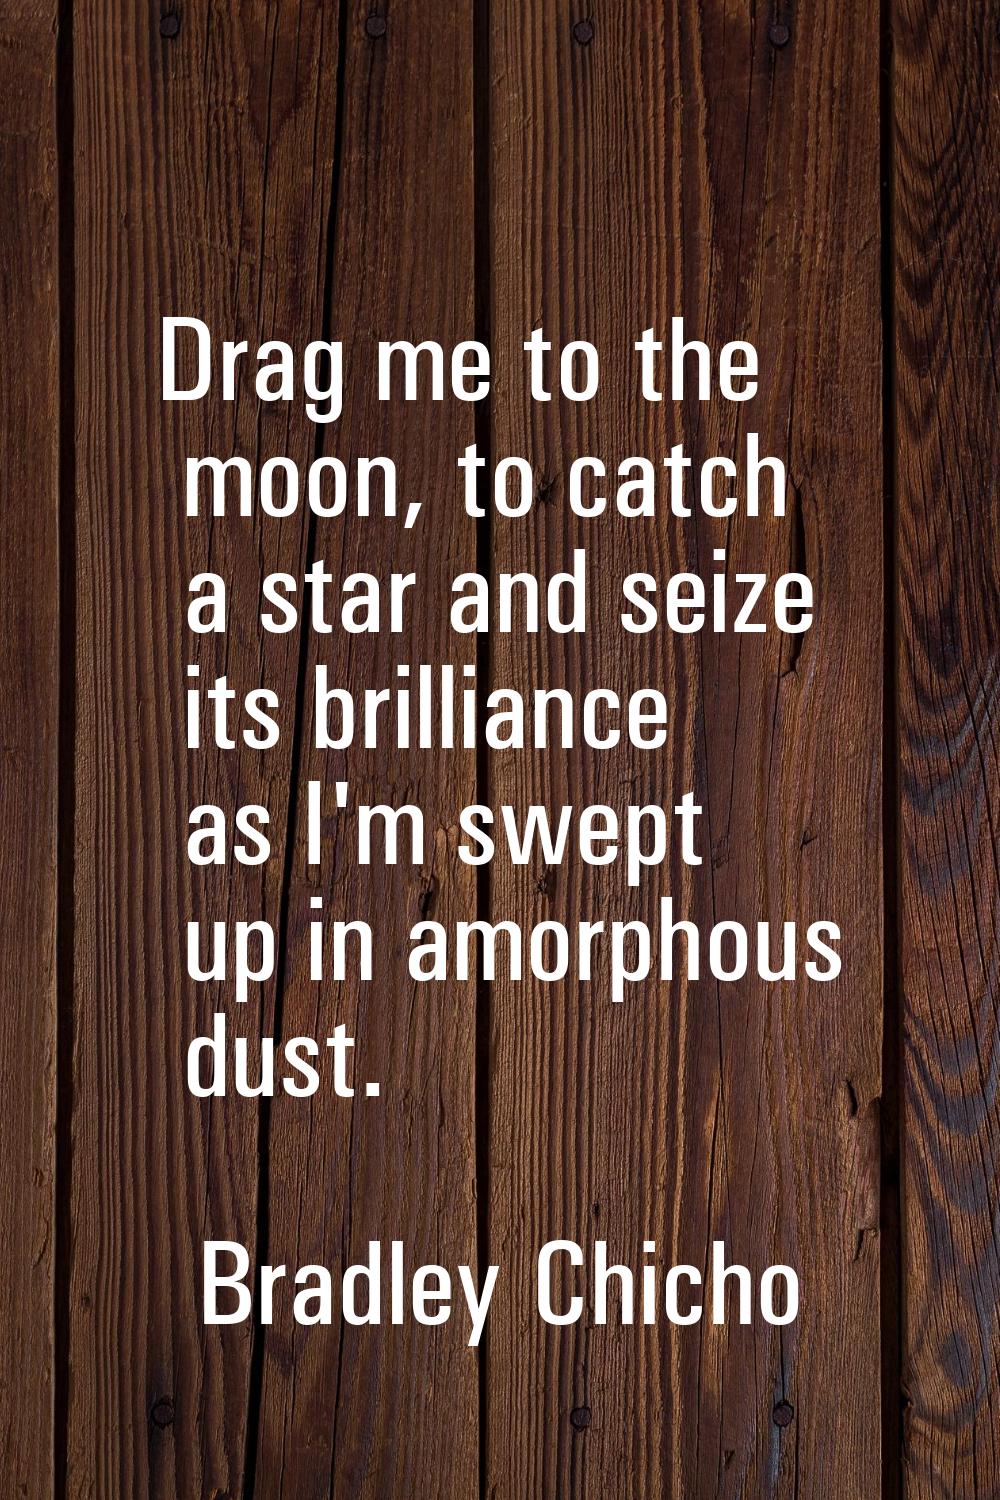 Drag me to the moon, to catch a star and seize its brilliance as I'm swept up in amorphous dust.